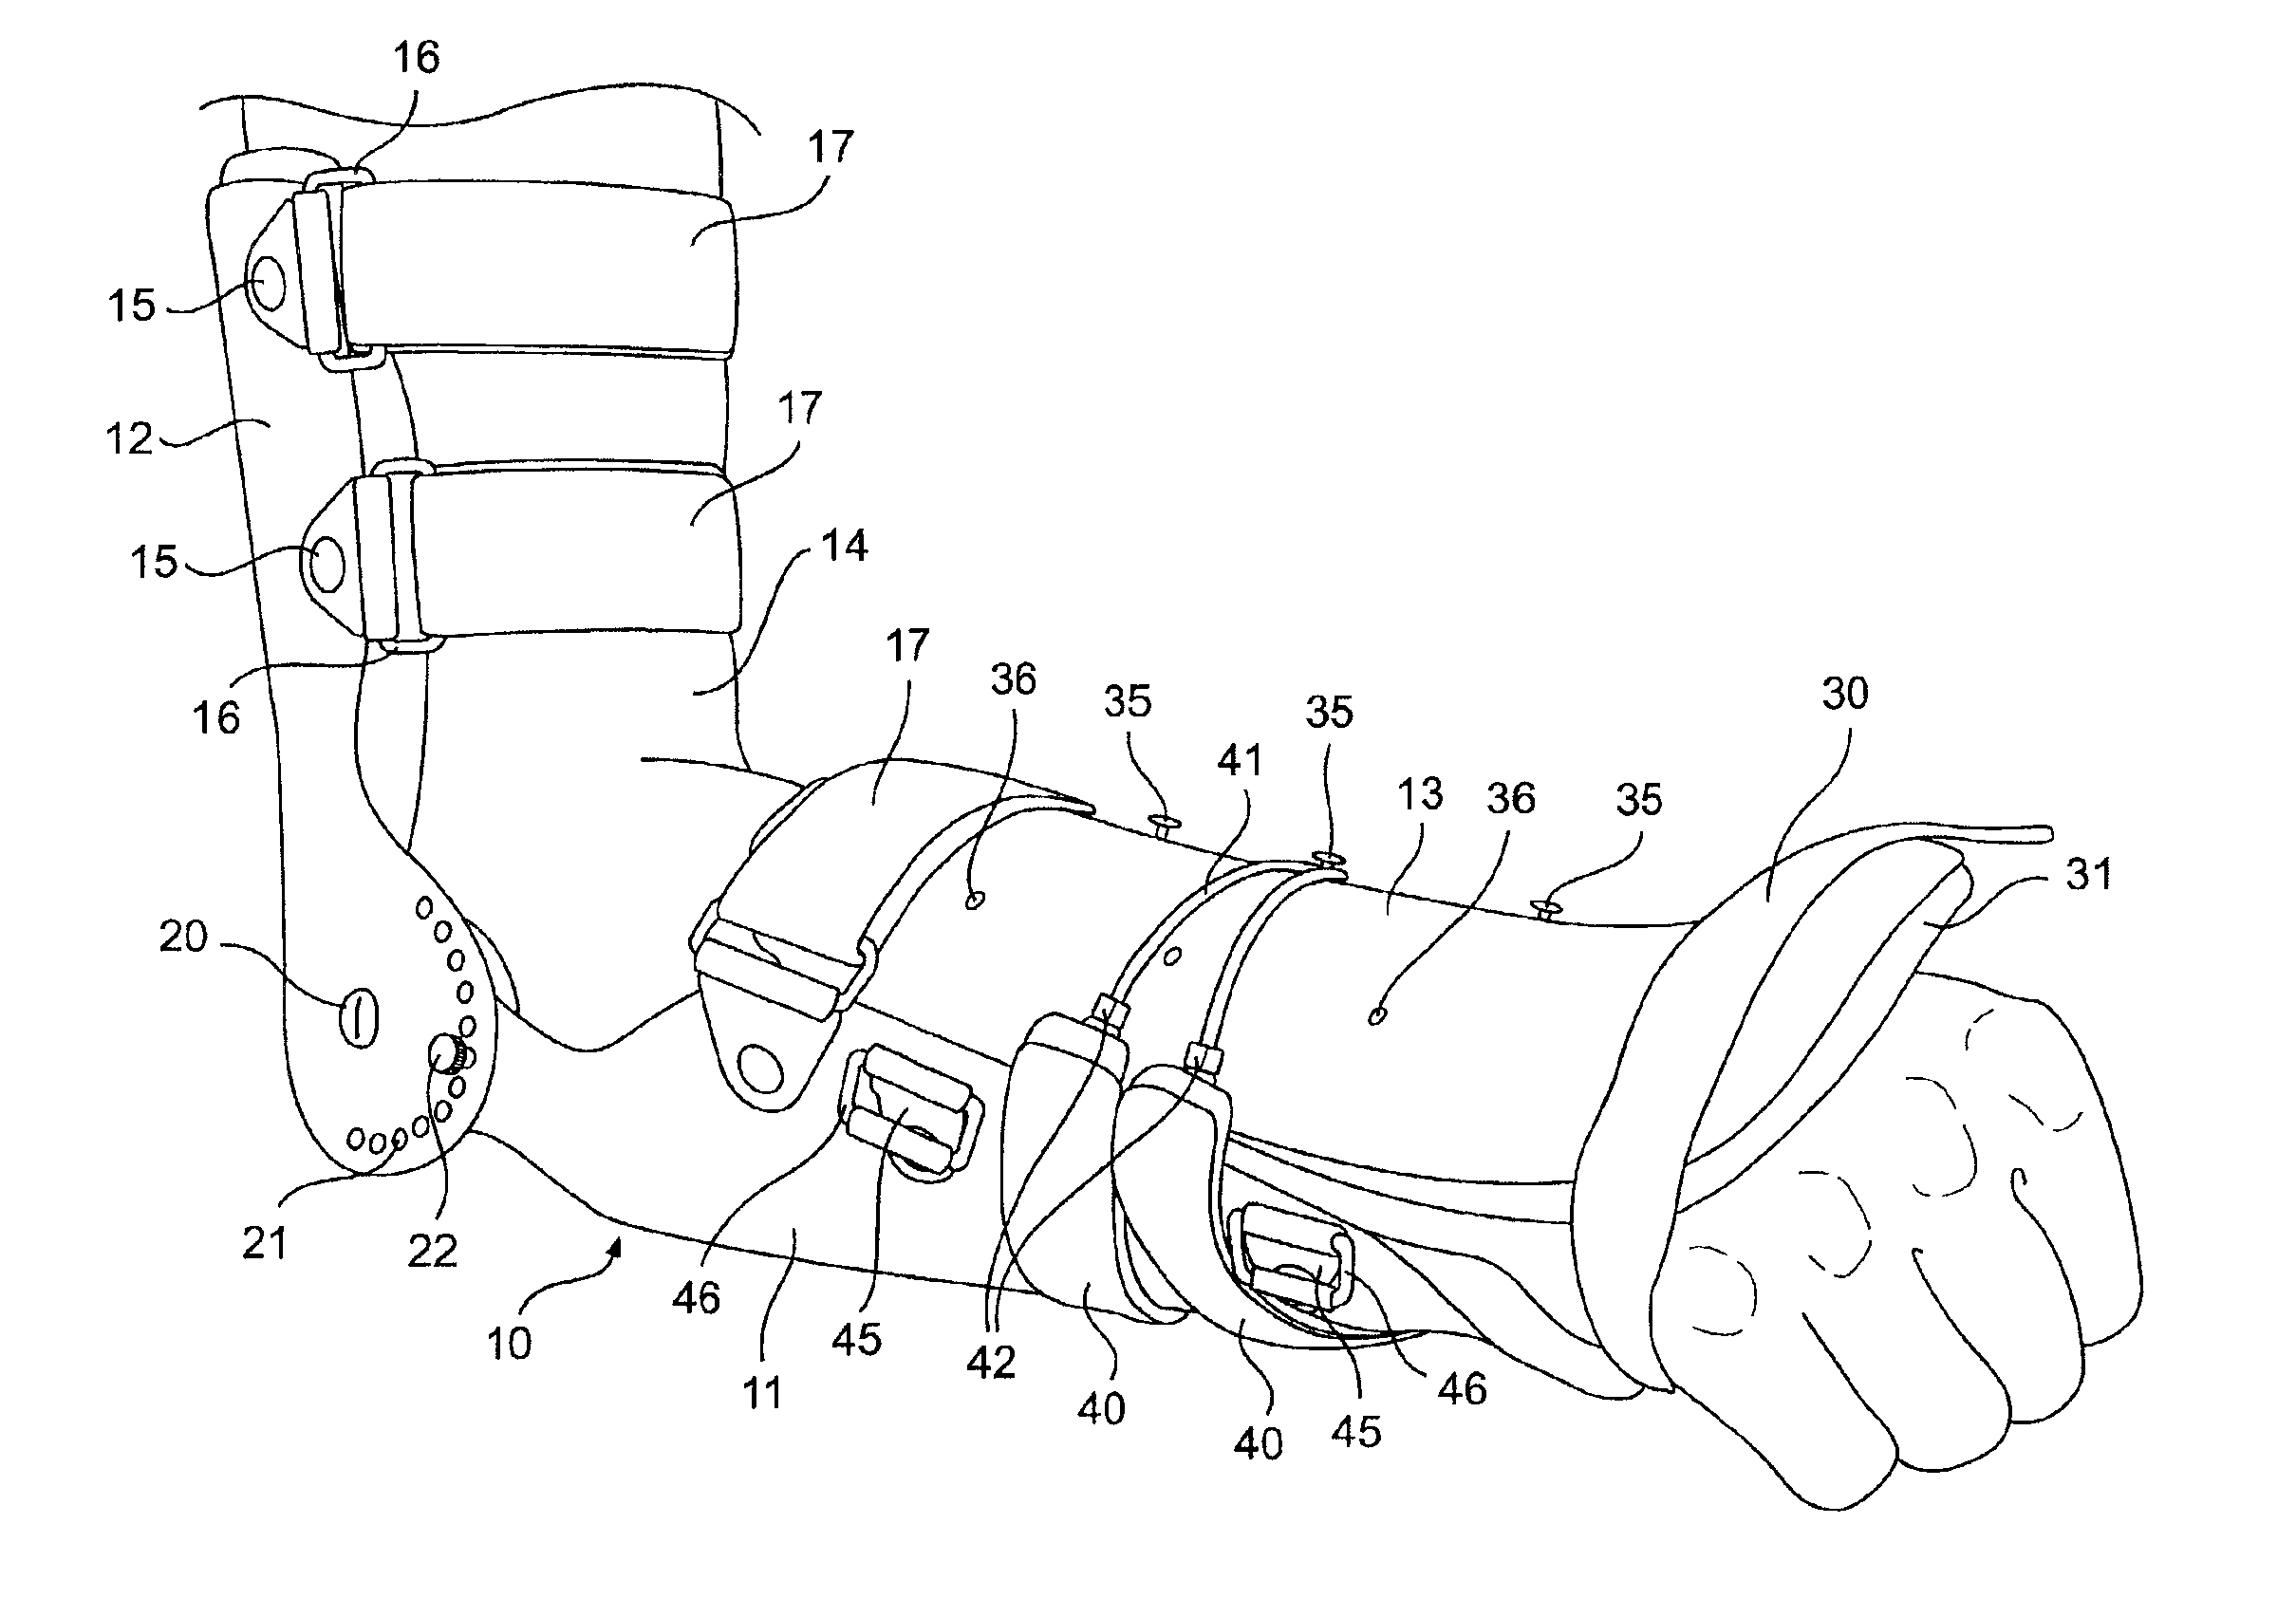 Supination/pronation therapy device